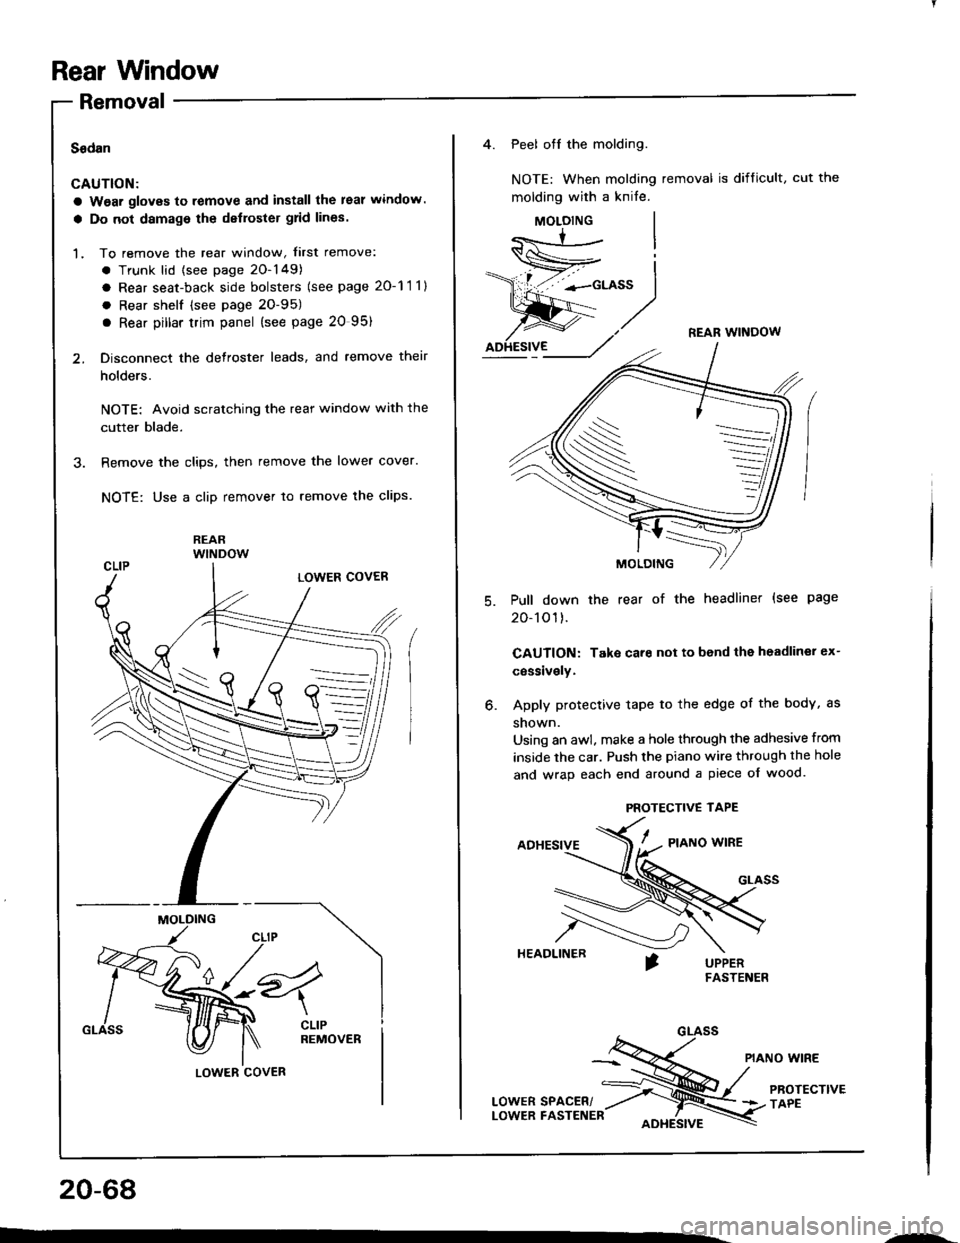 HONDA INTEGRA 1994 4.G Workshop Manual Rear Window
Removal
Sadan
CAUTION:
a Wear gloves to remove and install the leal window.
a Do not damage the delloster grid lines.
1. To remove the rear window, f irst remove:
. Trunk lid {see page 20-